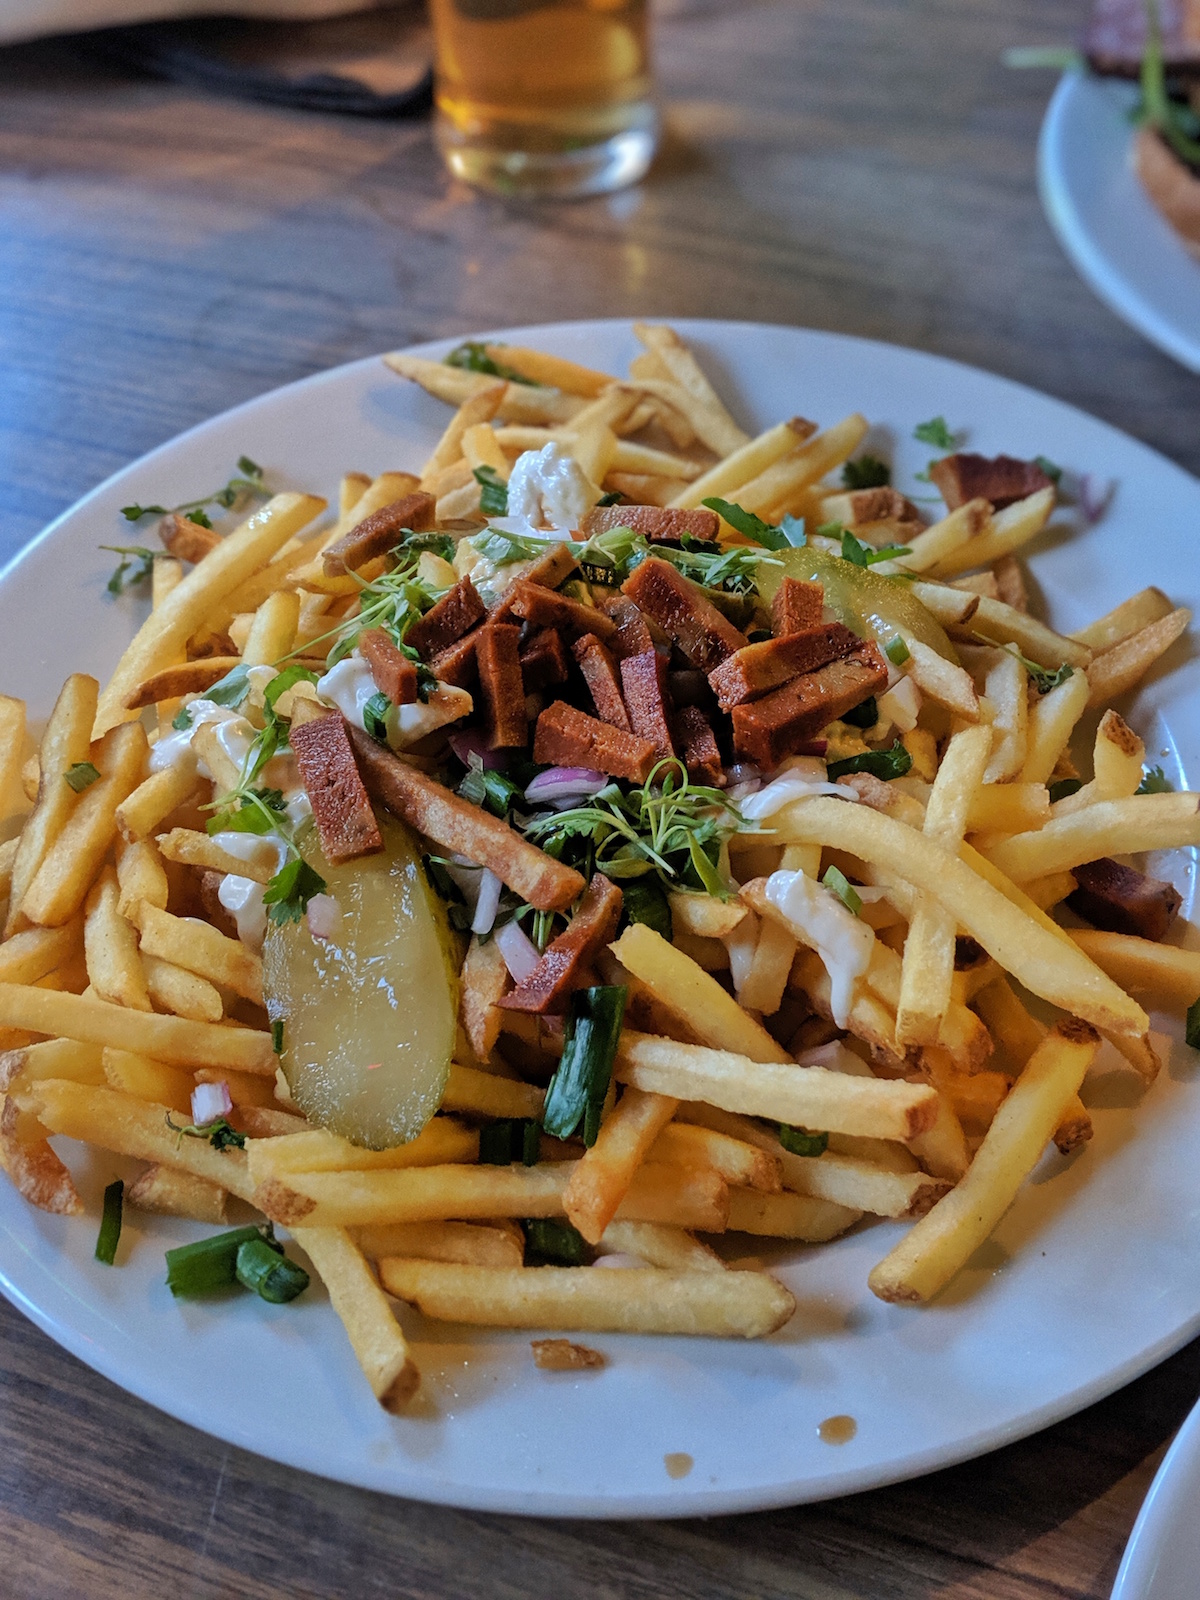 Vegan dirty fries from Owl & Hitchhiker